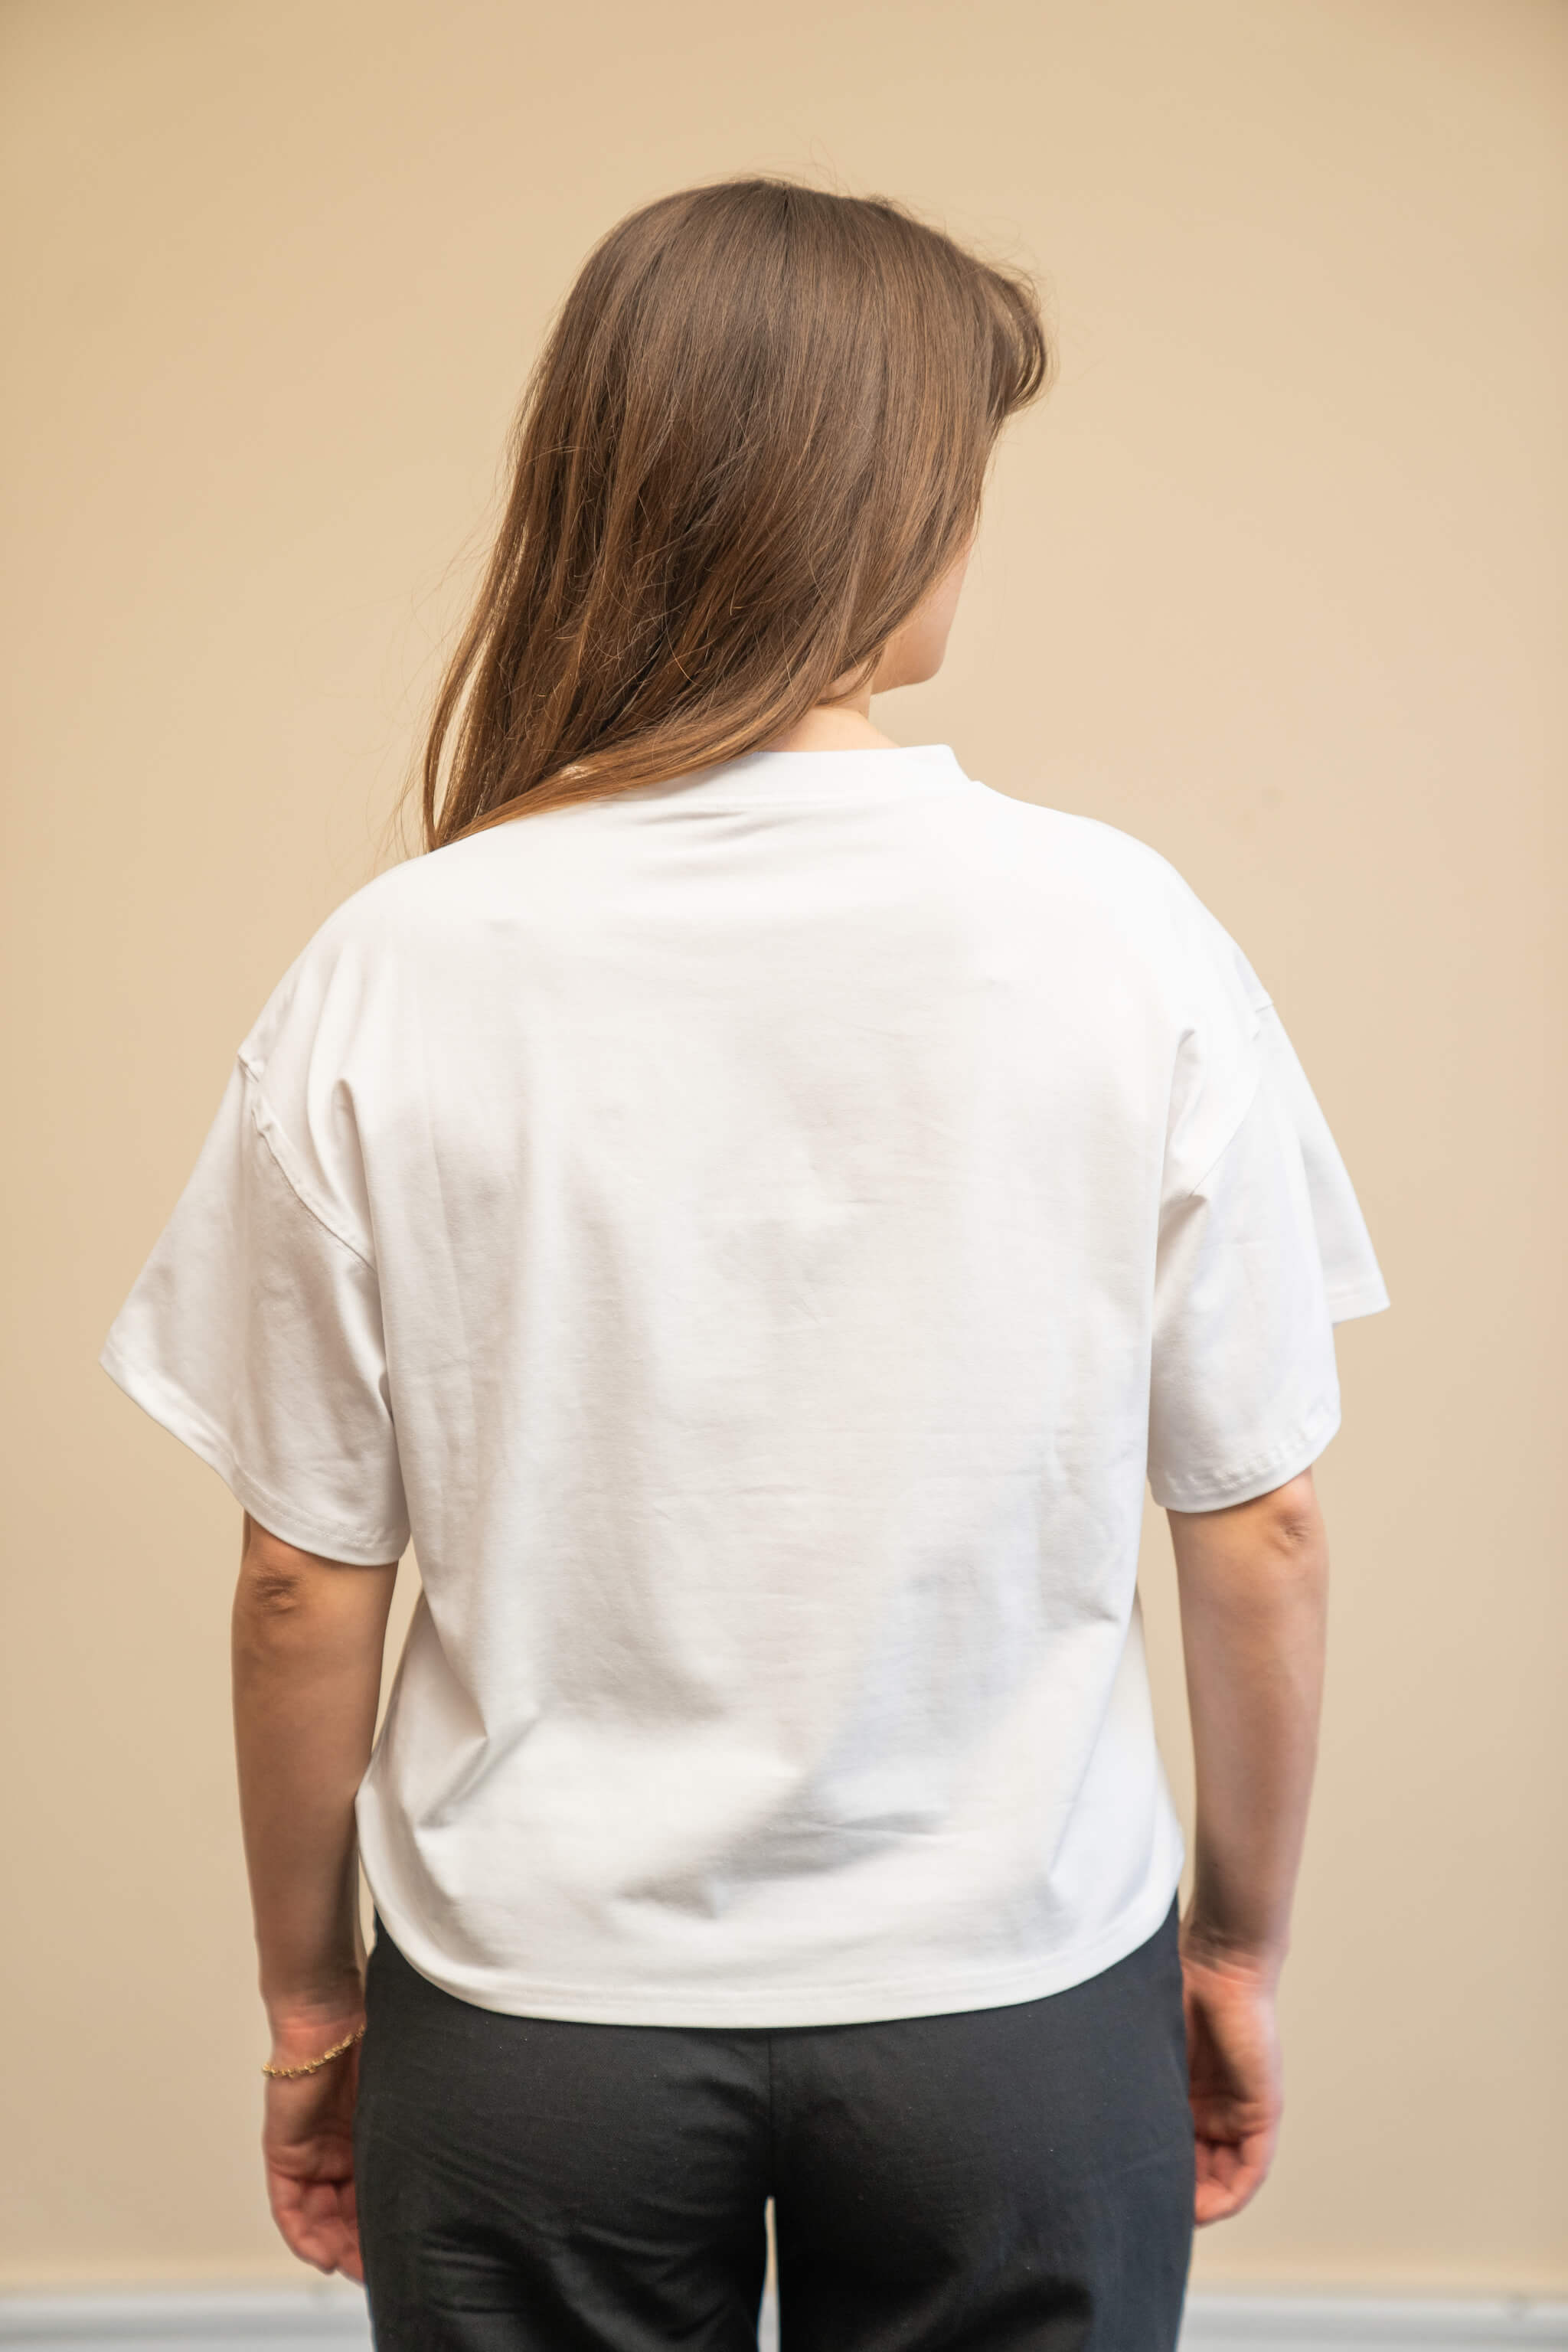 Rear view of a woman wearing a white t-shirt from Cyme Copenhagen's spring/summer collection. The t-shirt has a simple and relaxed fit, showcasing the clean lines and minimalist design. The model stands against a neutral background, emphasizing the versatility and casual elegance of the garment.